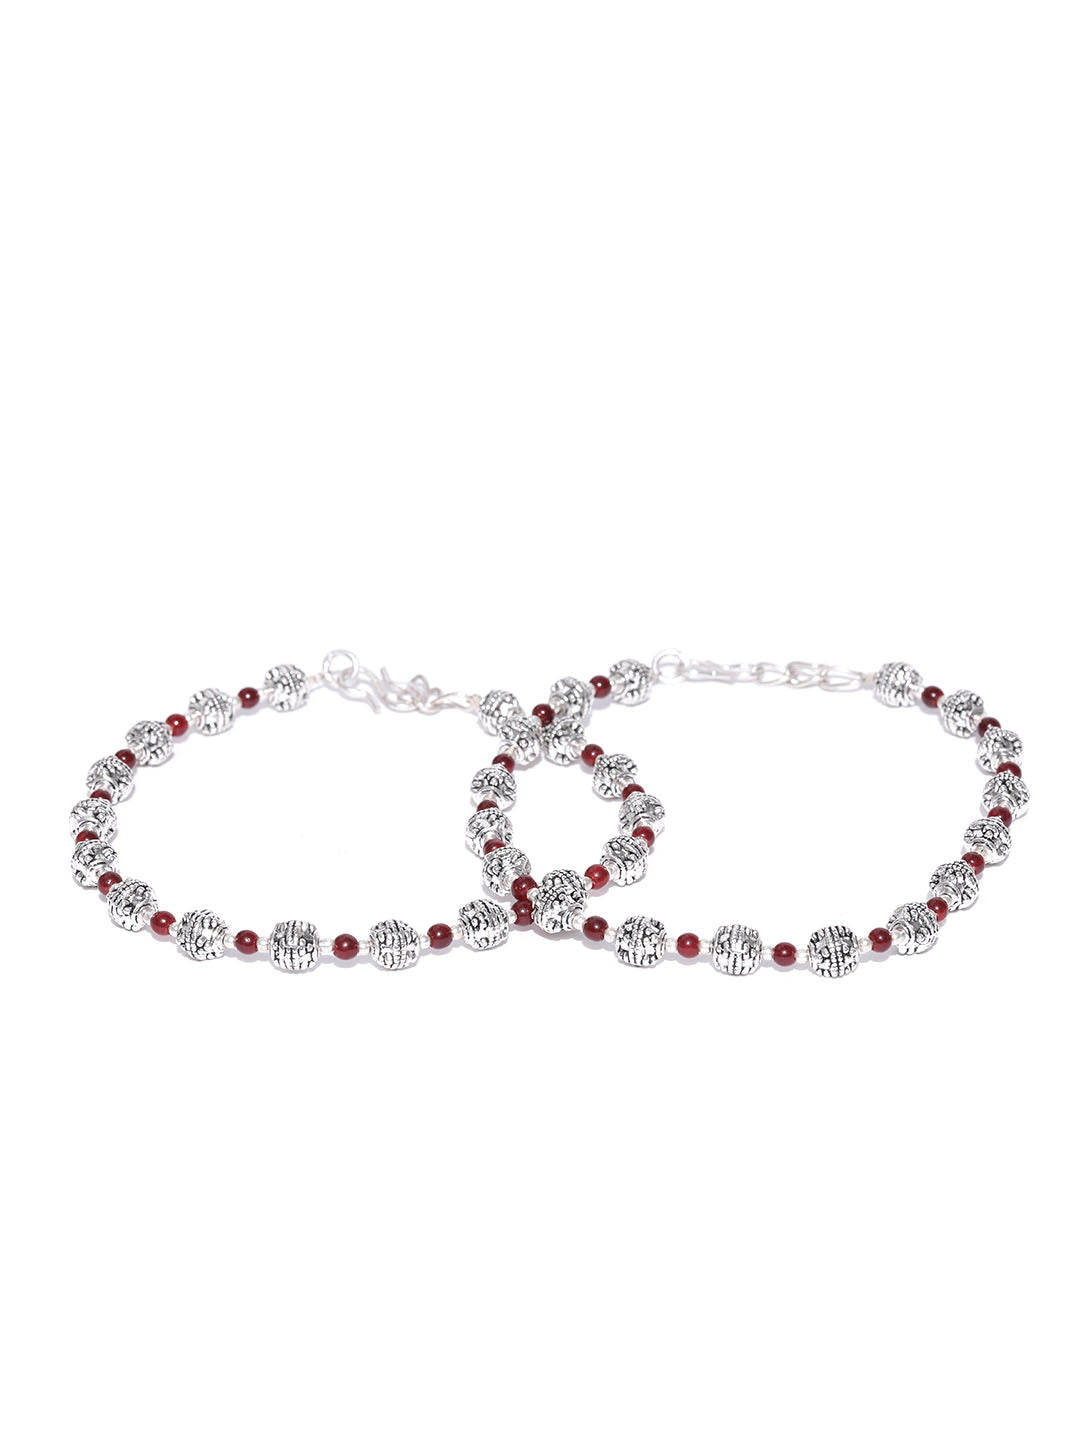 Oxidised Silver Floral Anklet for Women & Girls